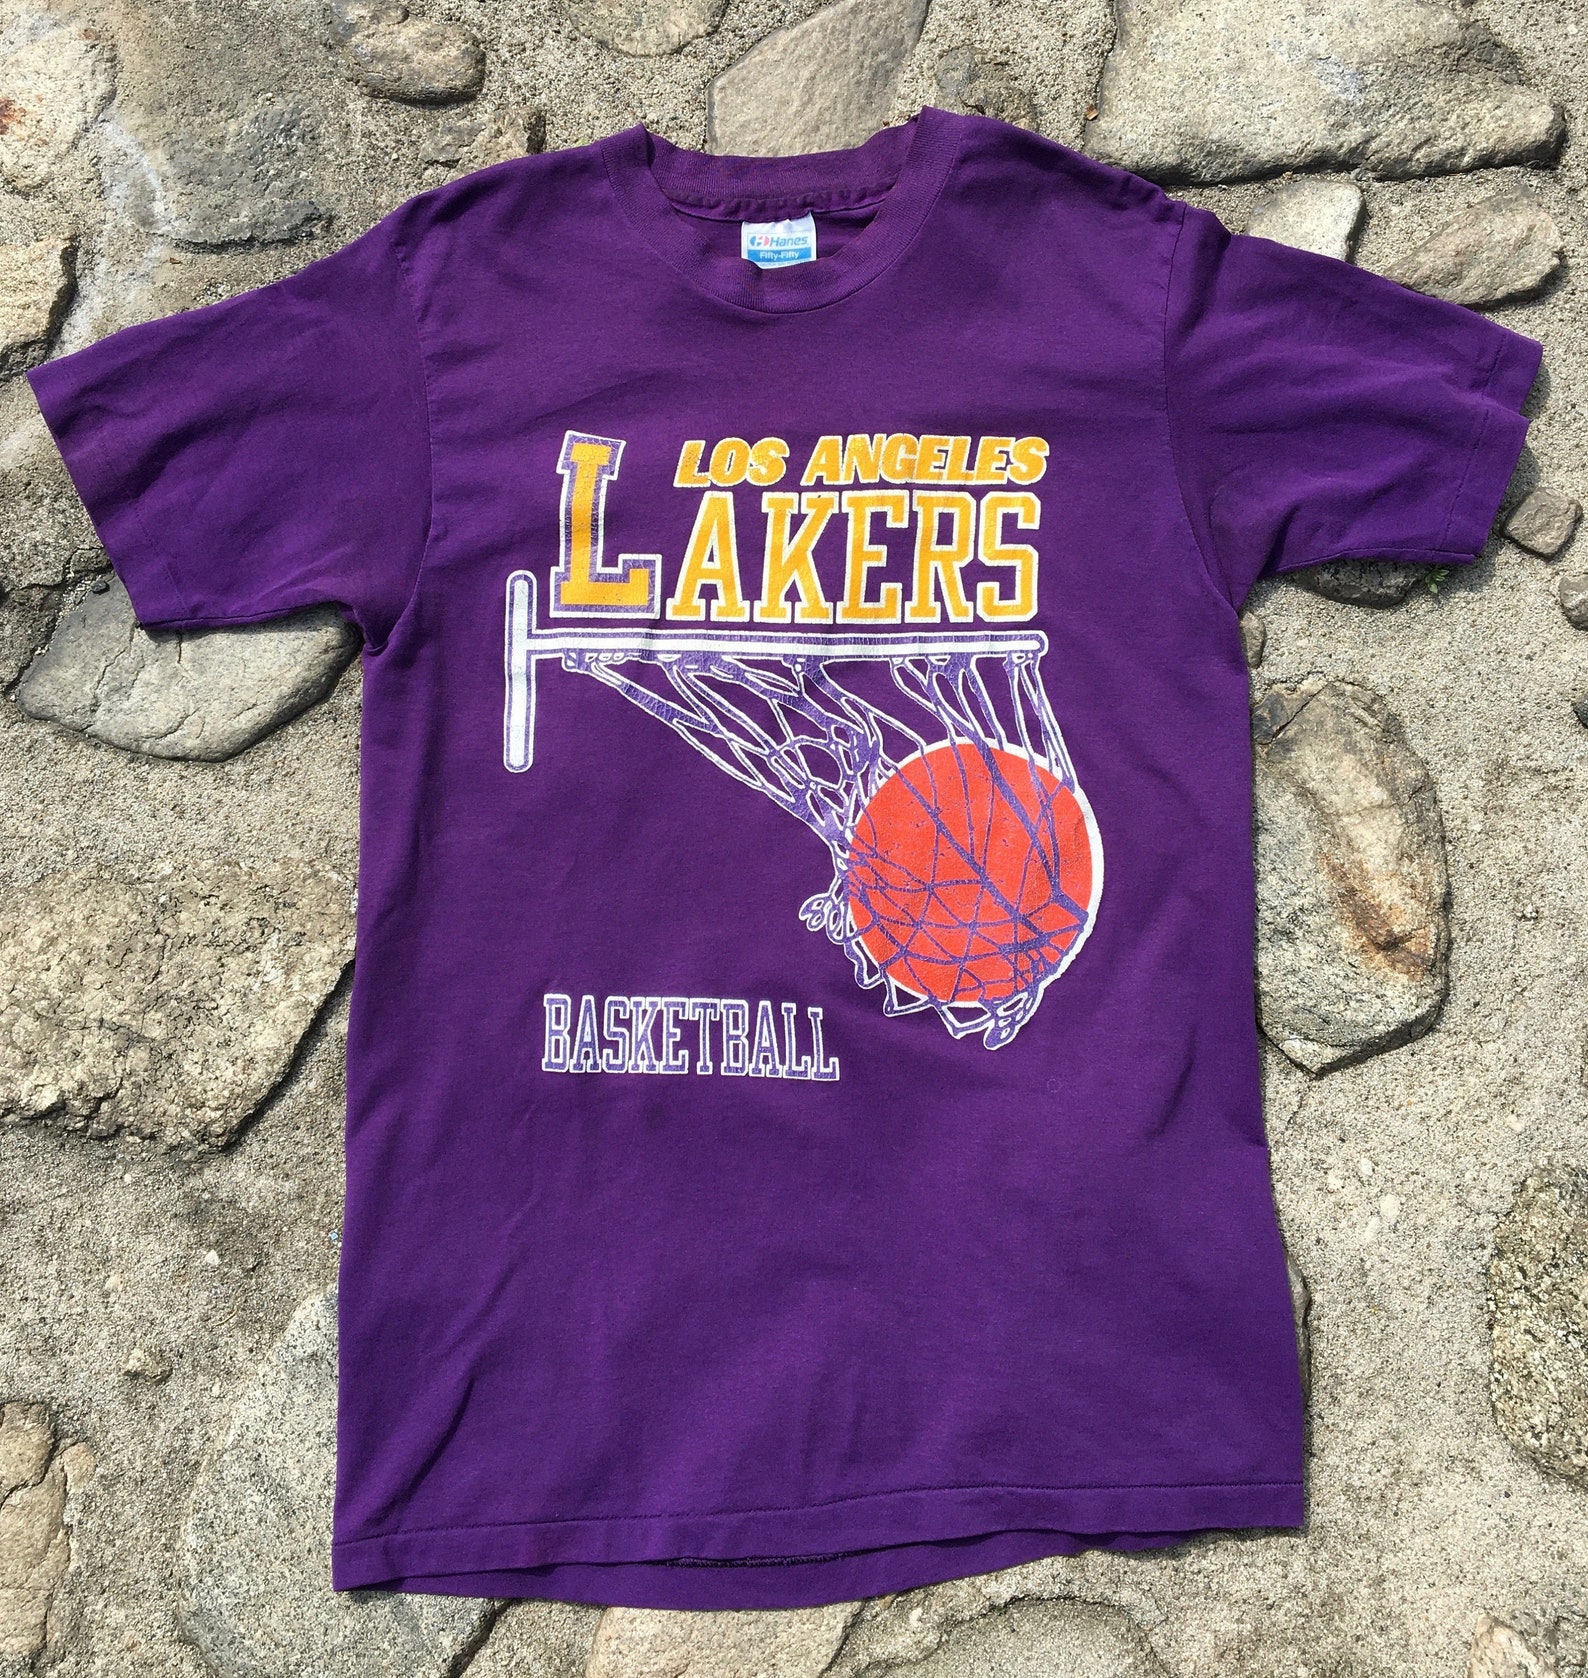 Vintage 1980's L.A. Lakers Basketball Graphic T-shirt M/L - Etsy